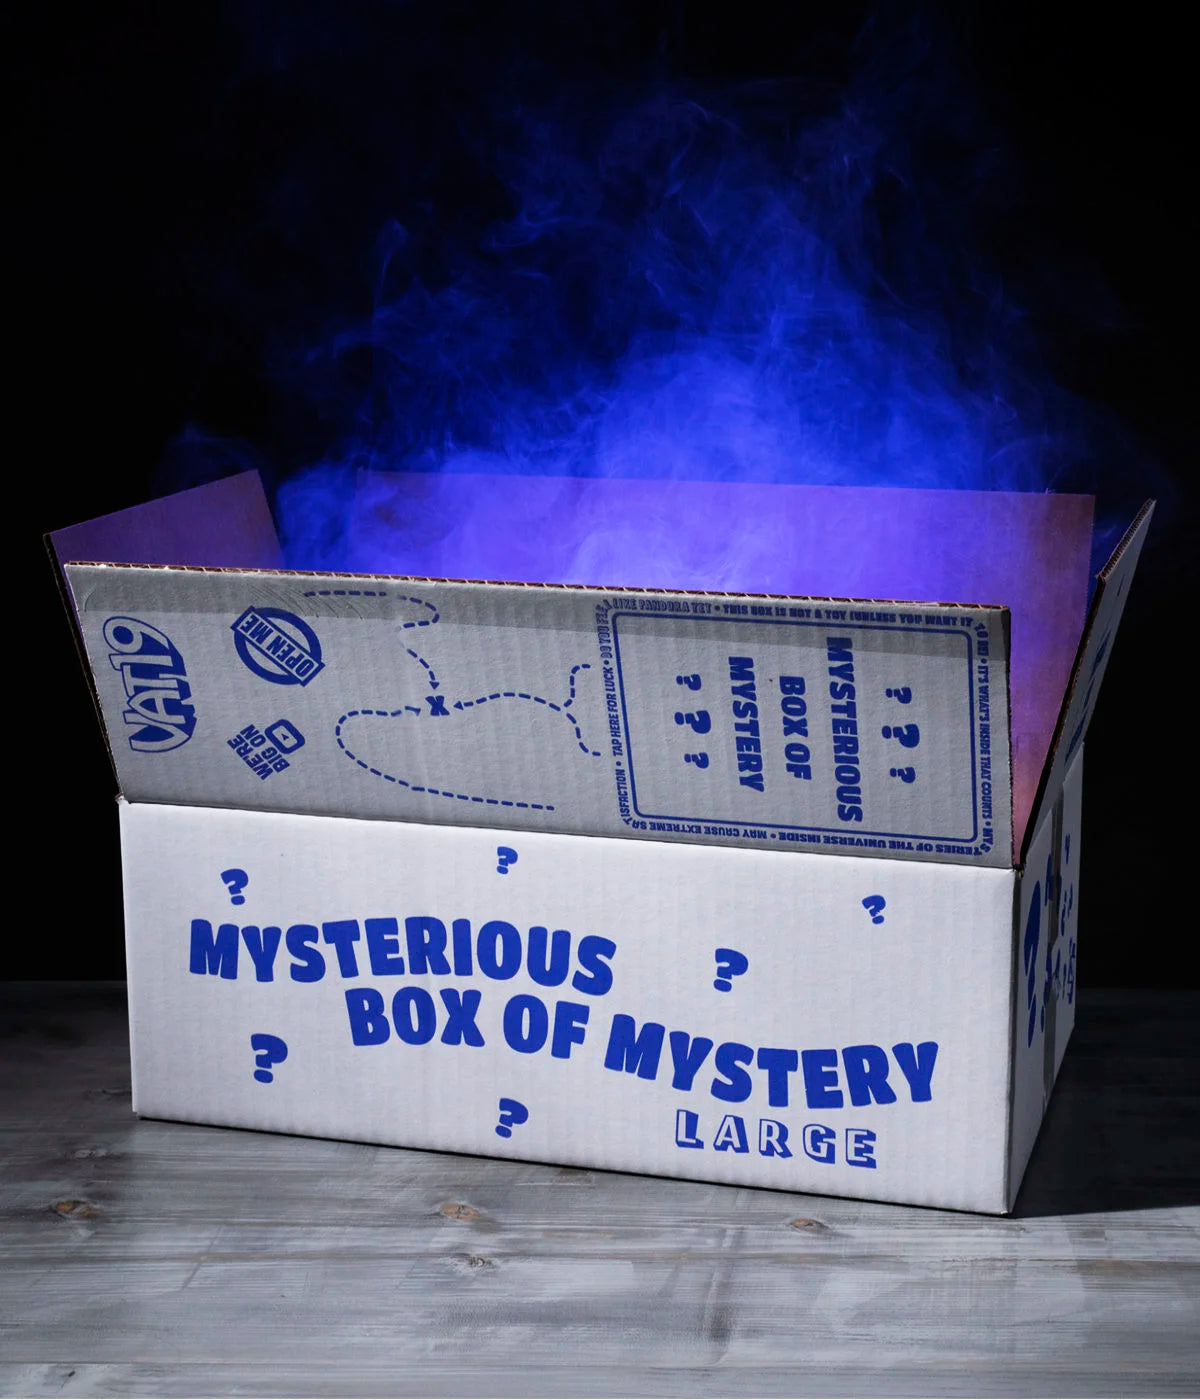 Large UVDTF Mystery Box – Two Bright Suns